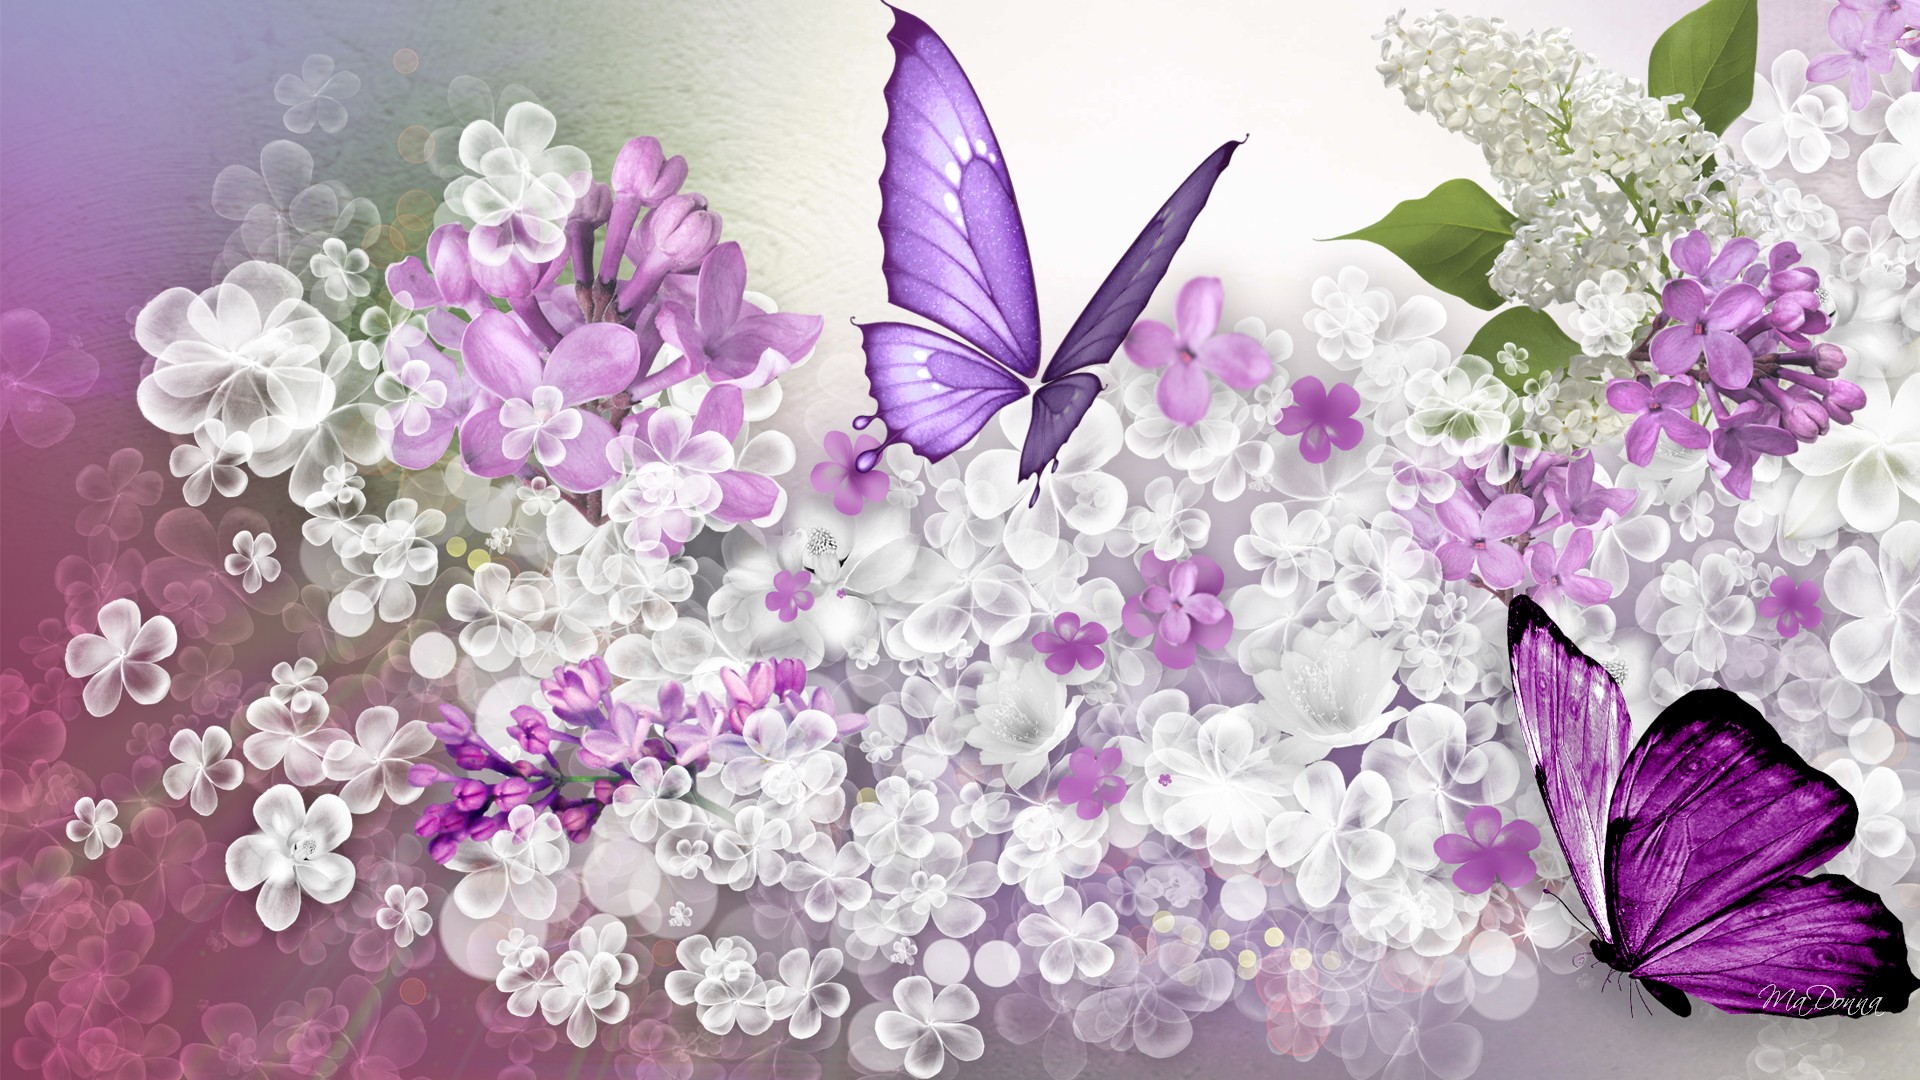 Lilac Flowers Windows Theme And Pictures All For